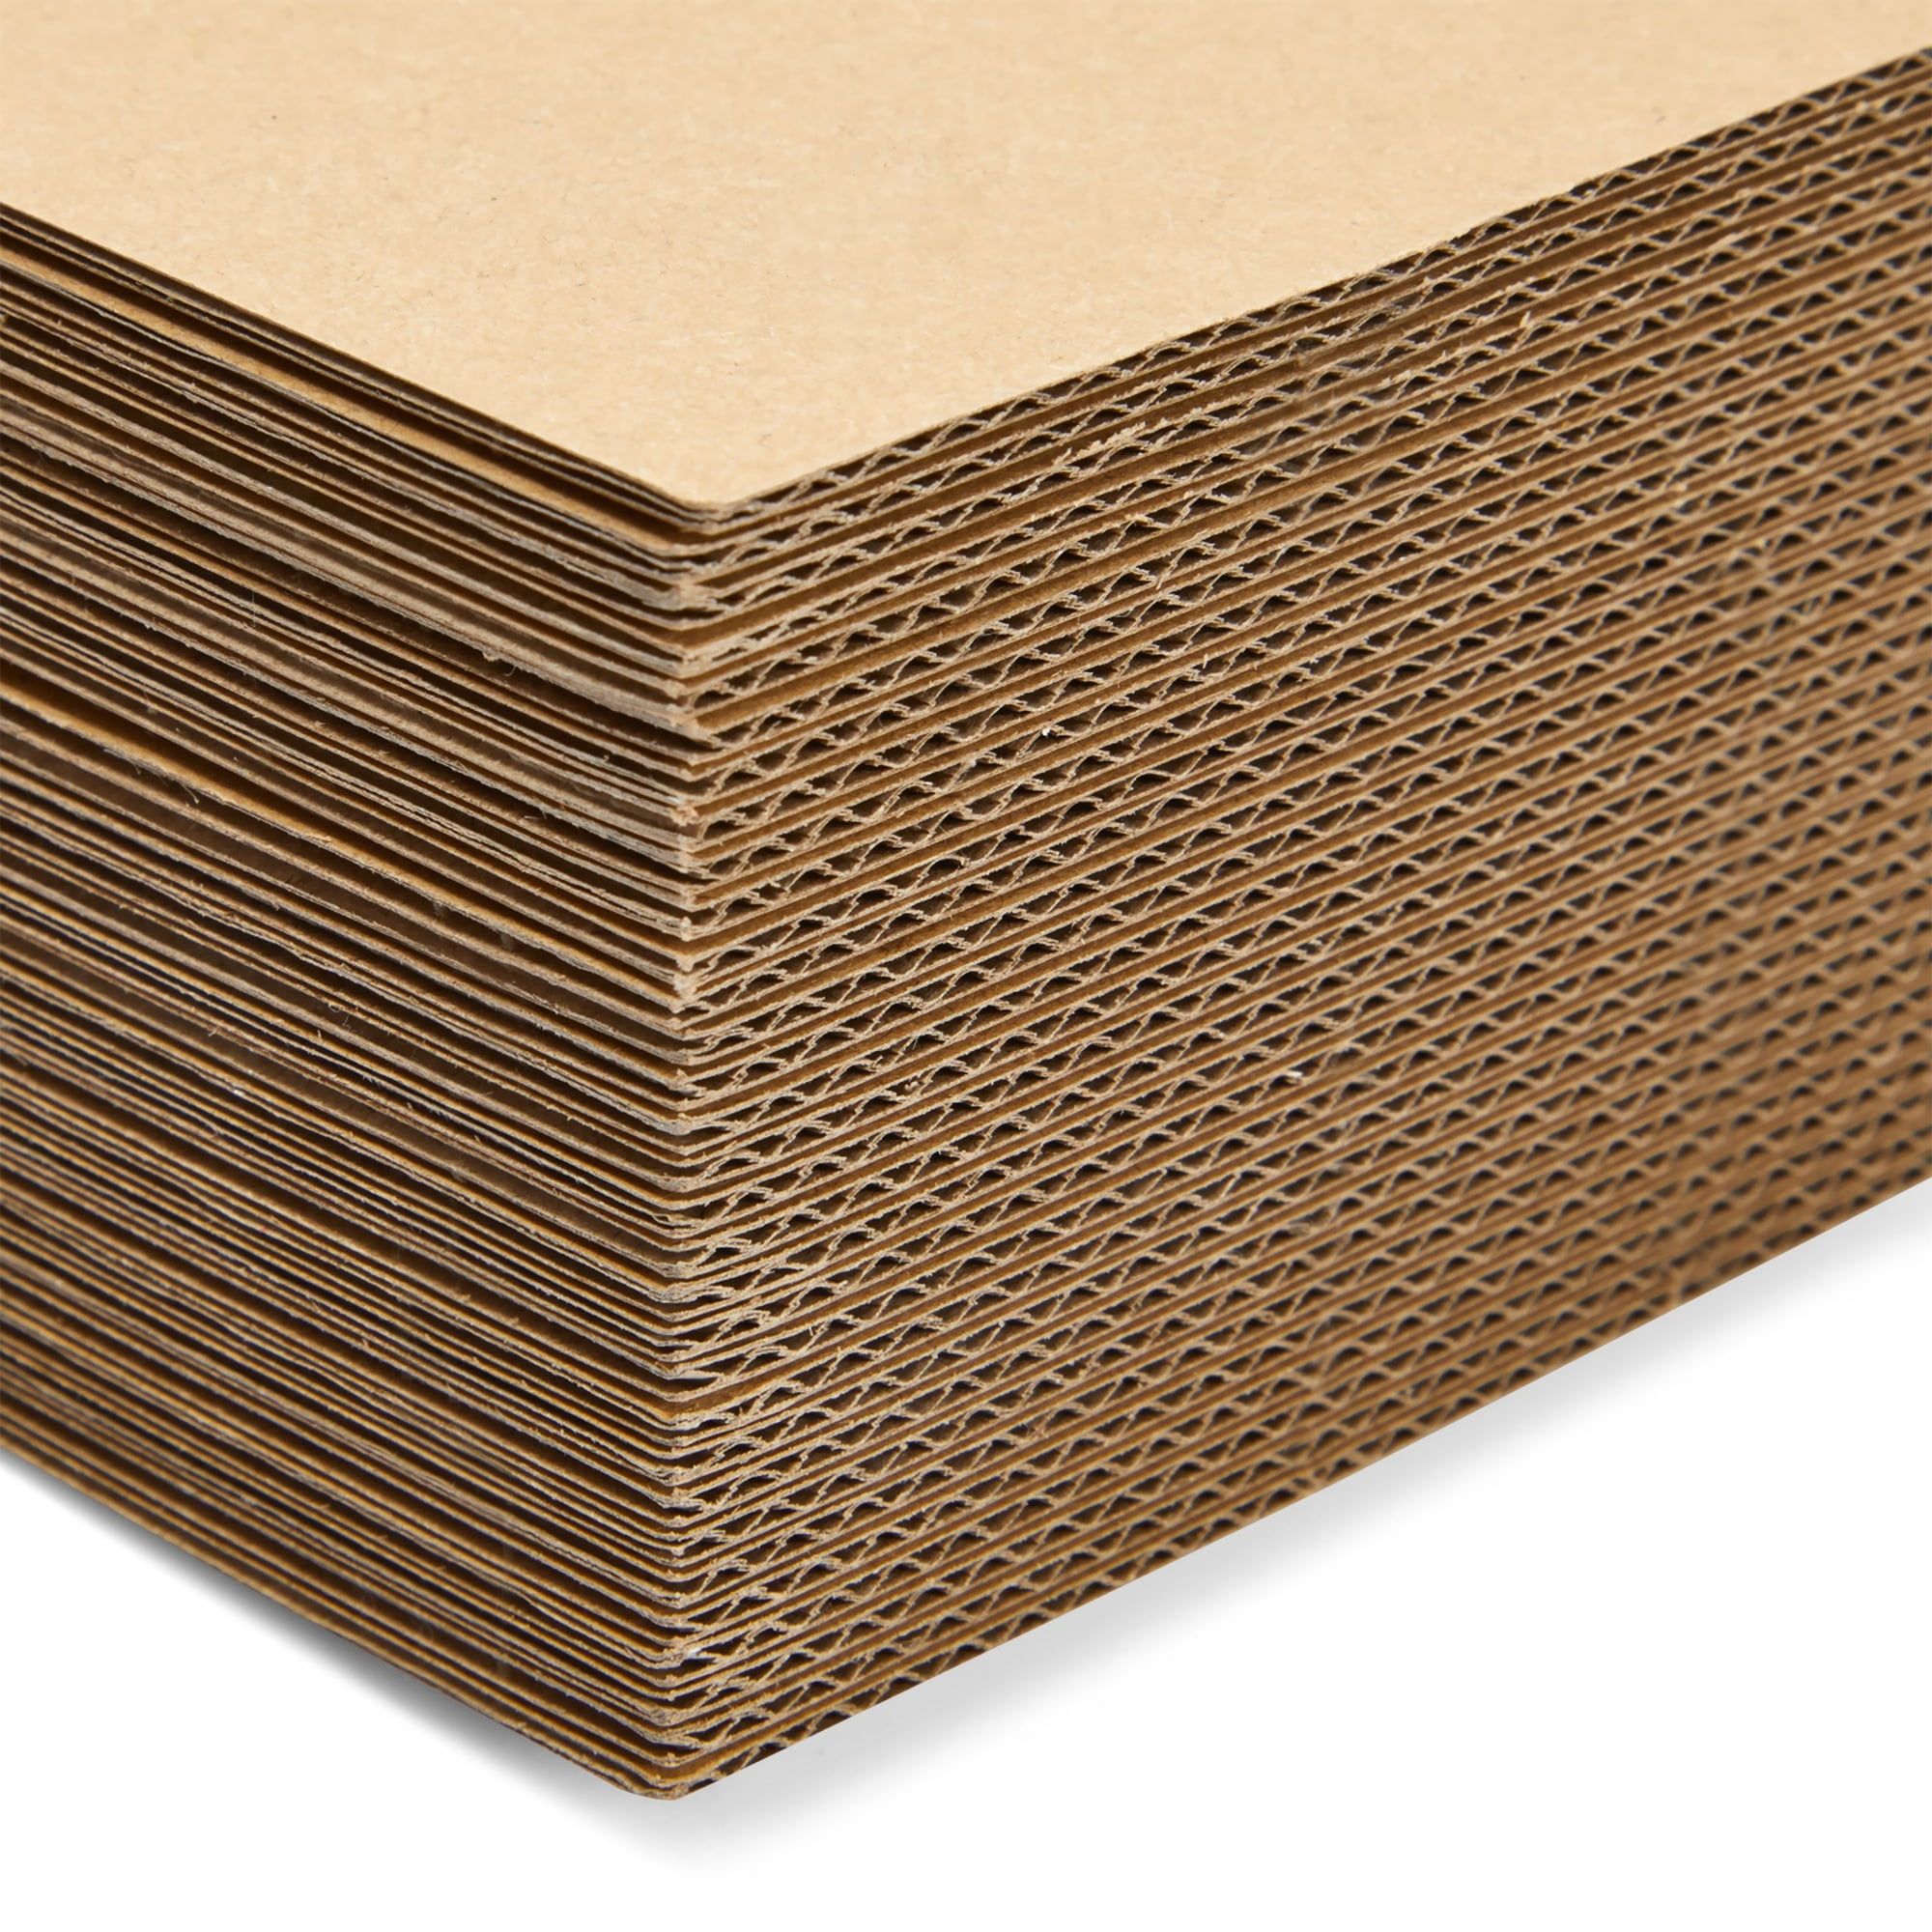 200 Pack 5x7 Corrugated Cardboard Sheets for Mailers, Flat Packaging  Inserts for Shipping, Mailing, Crafts, 2mm Thick